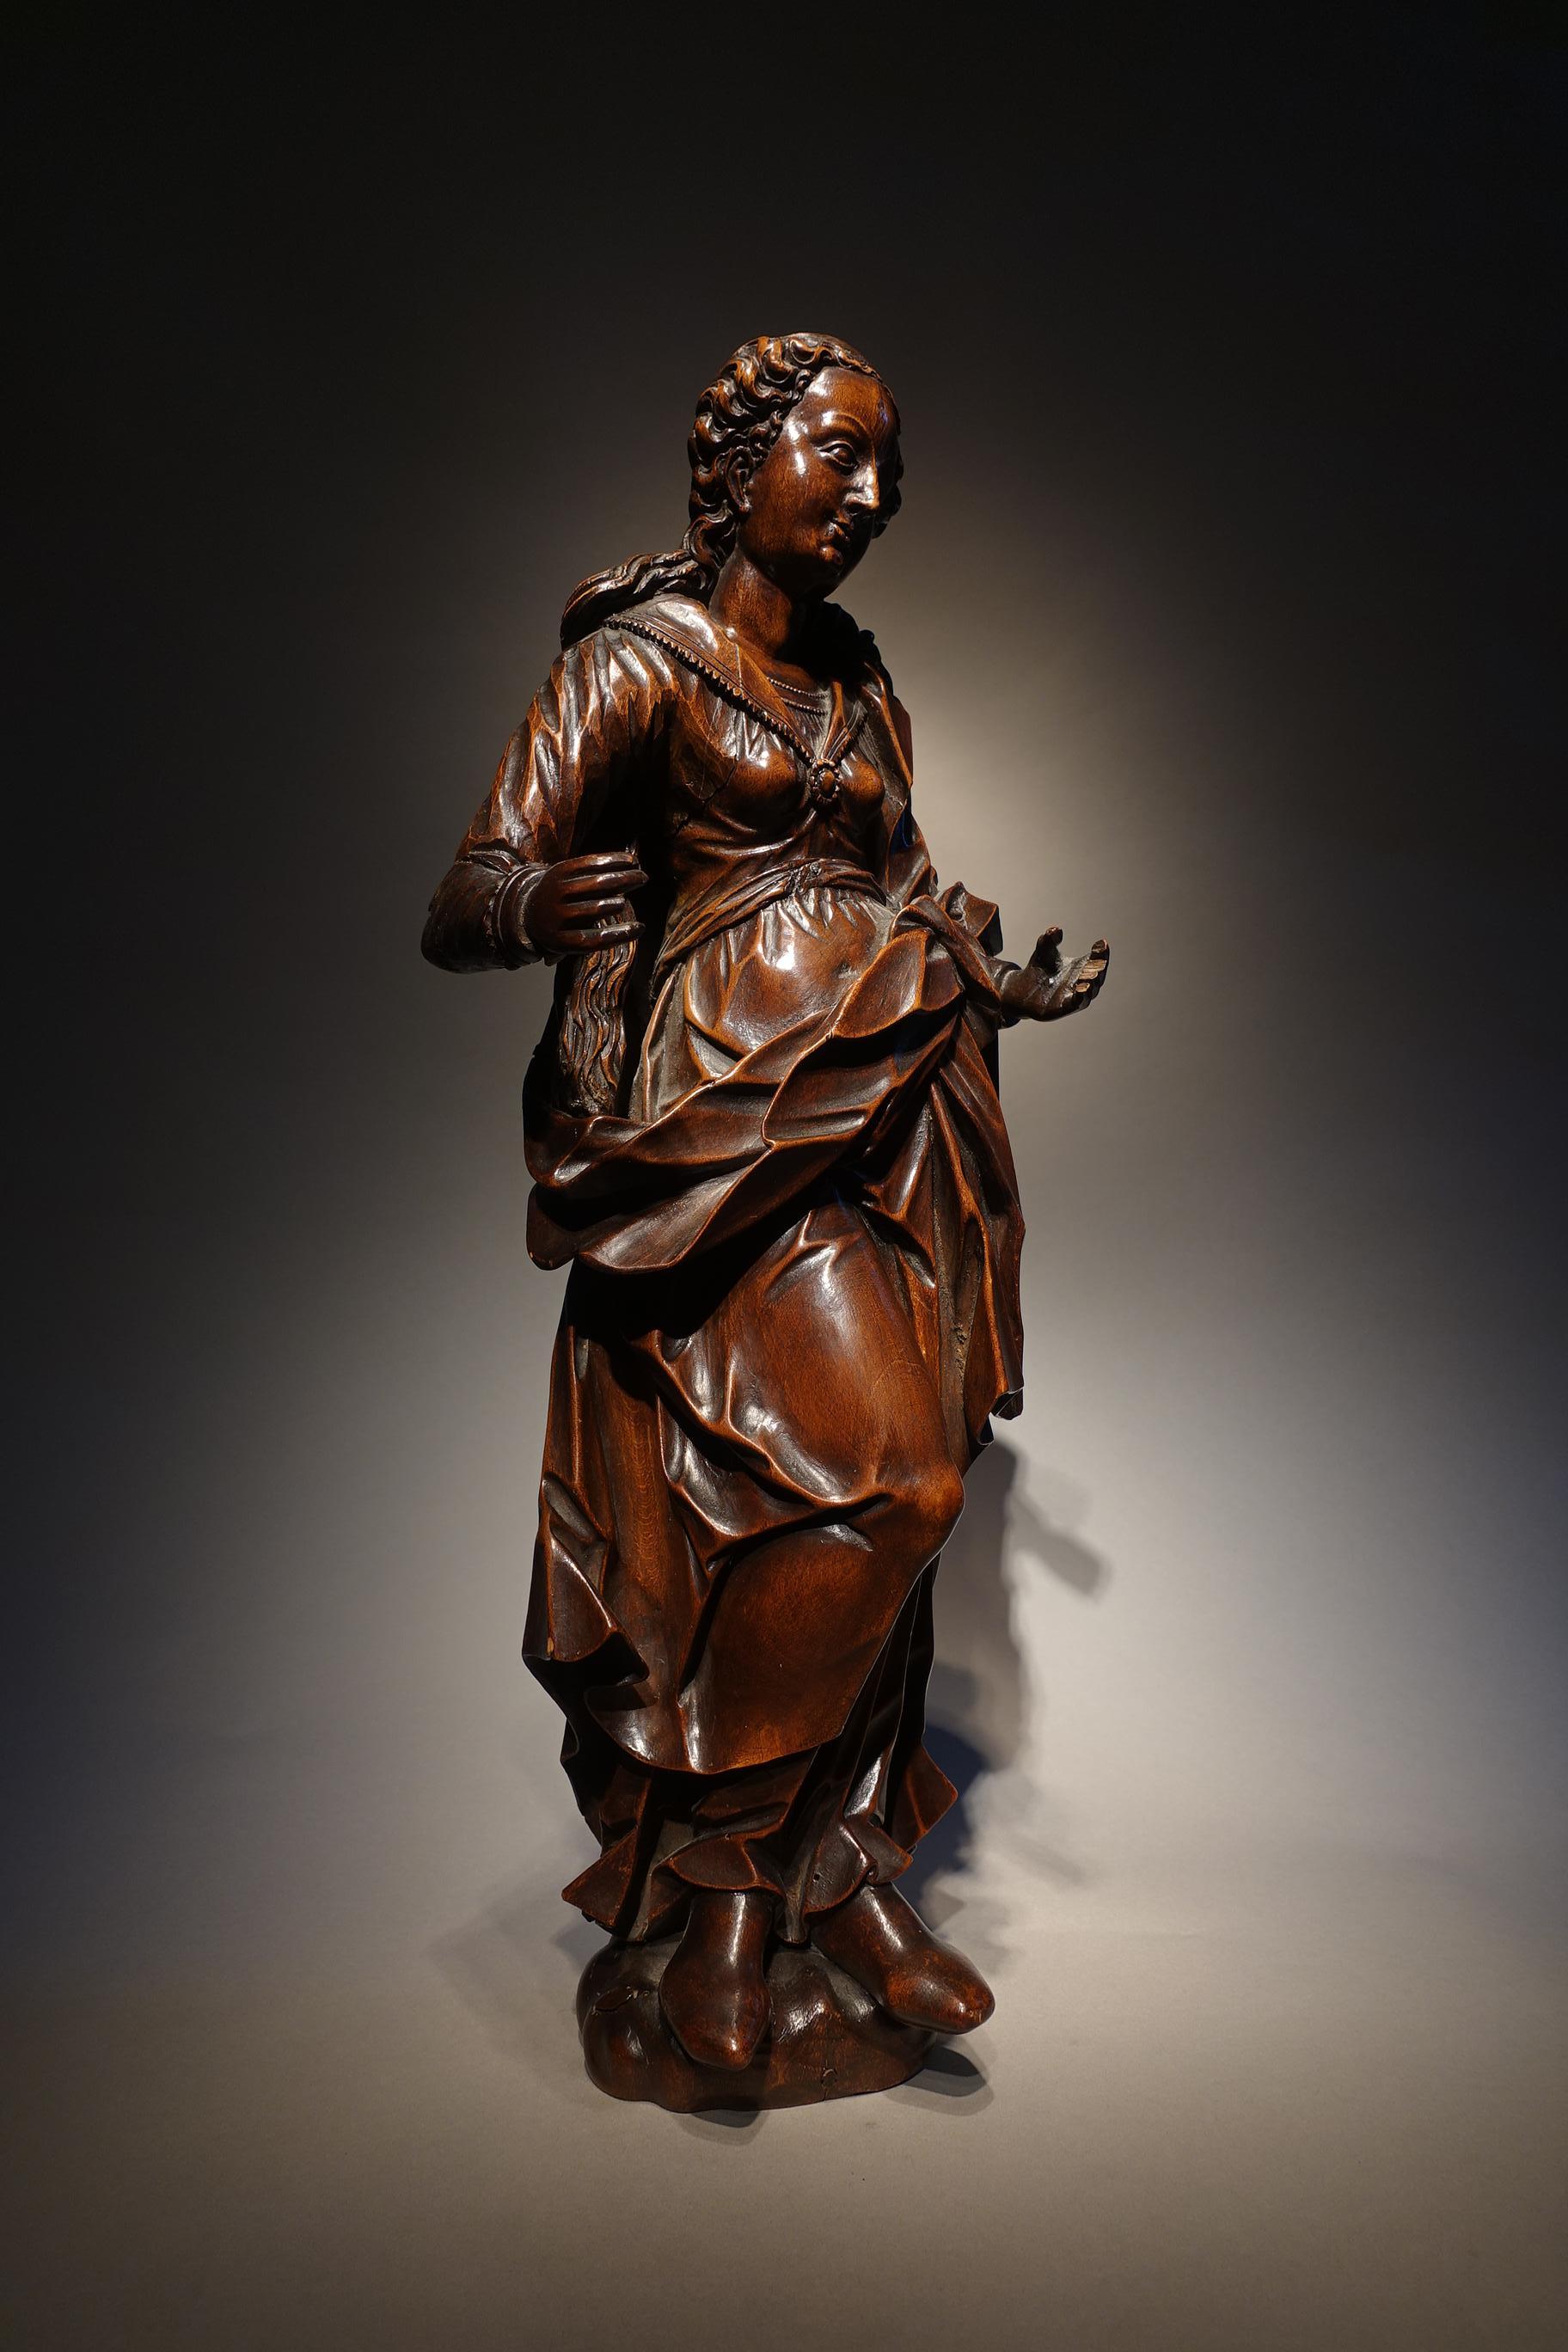 Statuette of the Virgin
South-German, circa 1600
sculpted wood
circa 1600
(right arm restored)
52 cm